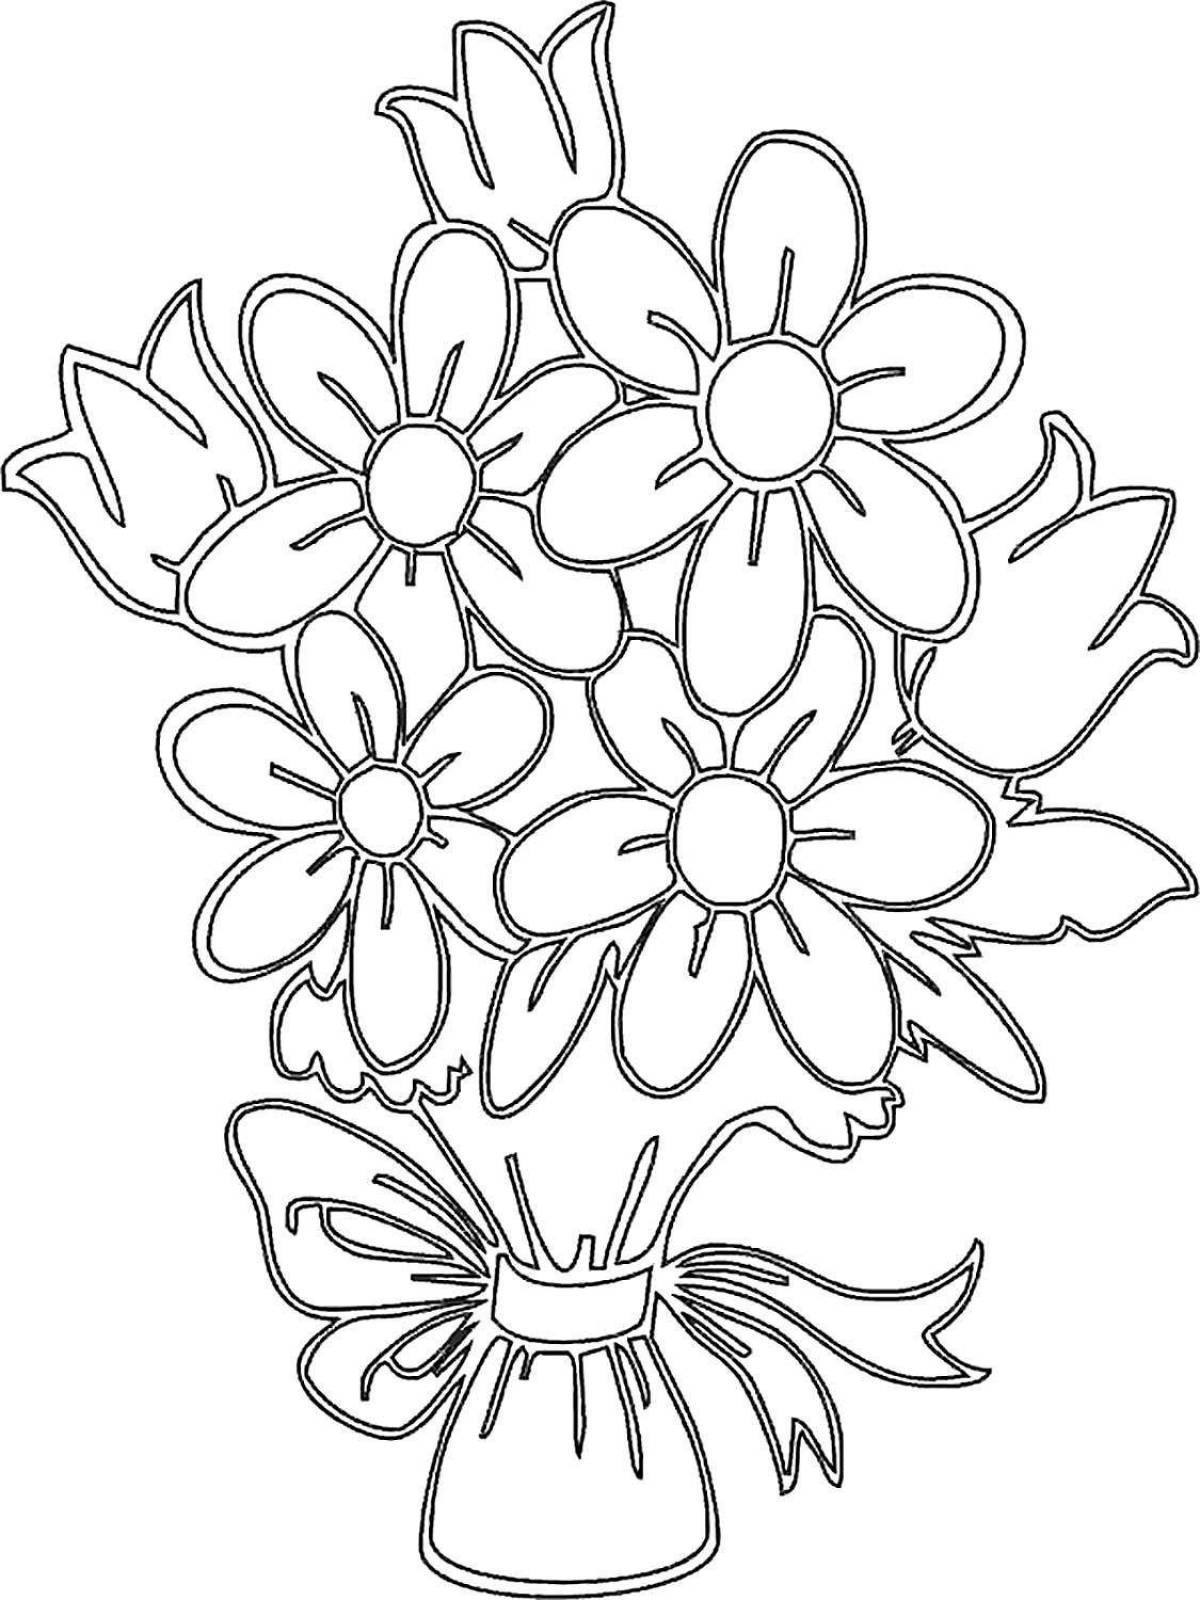 Fun flower coloring for kids